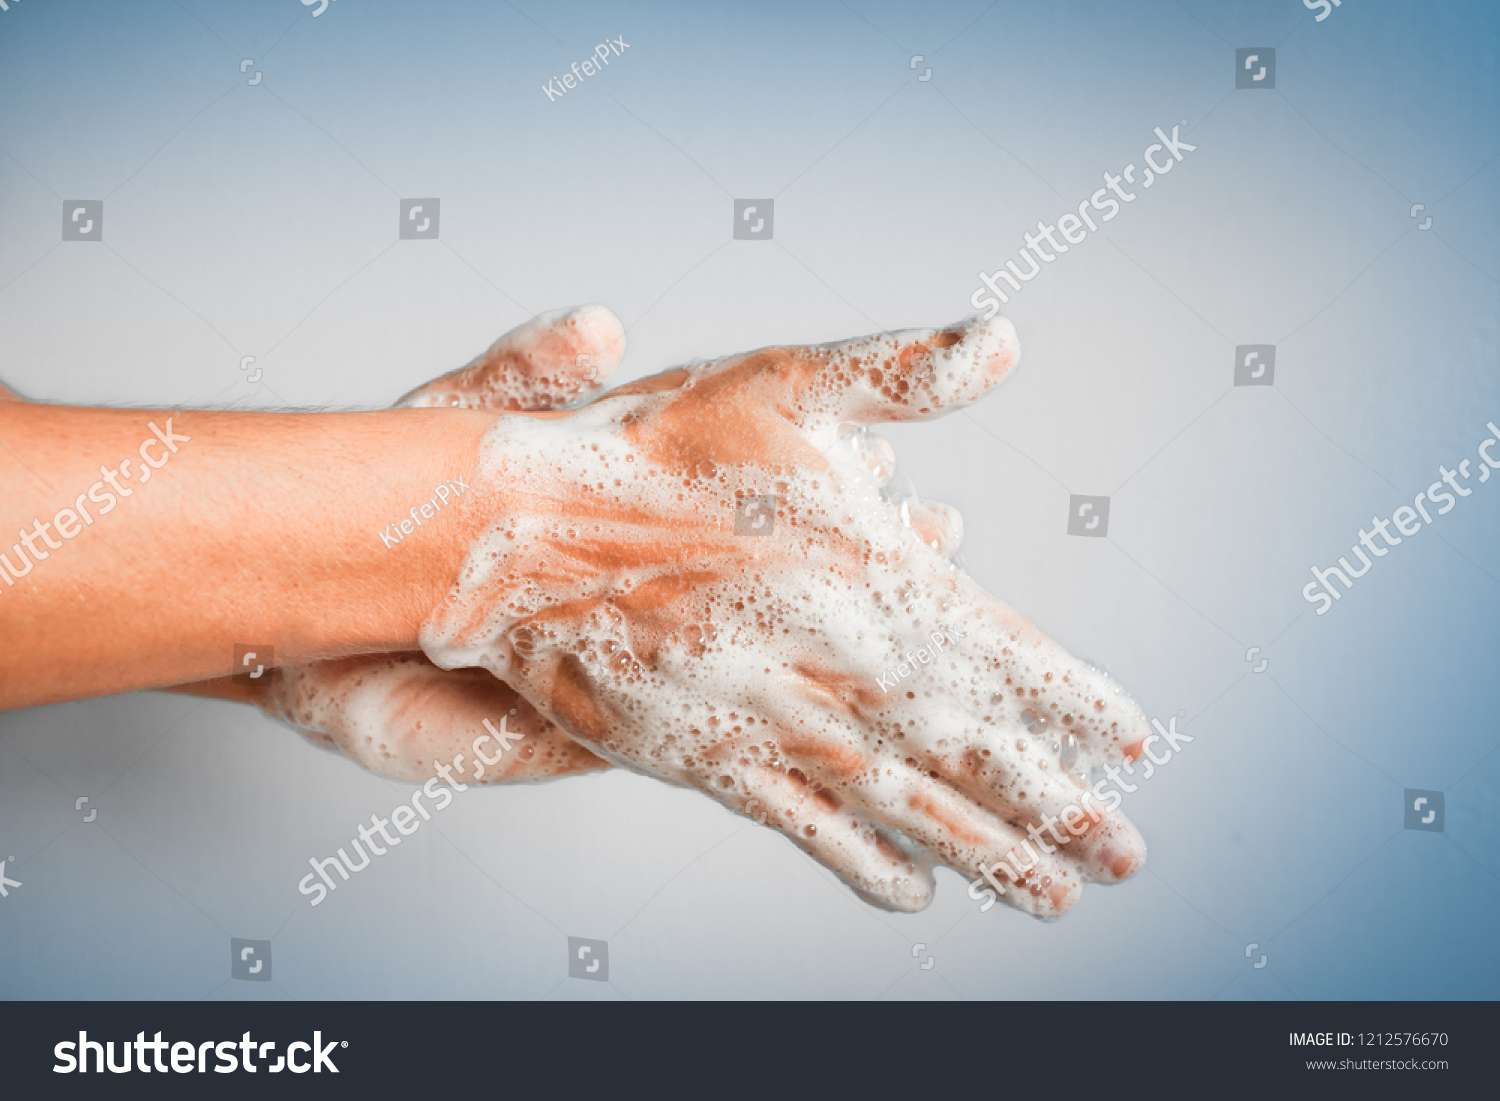 Wash your hands. Health- cleanliness concept.  #1212576670